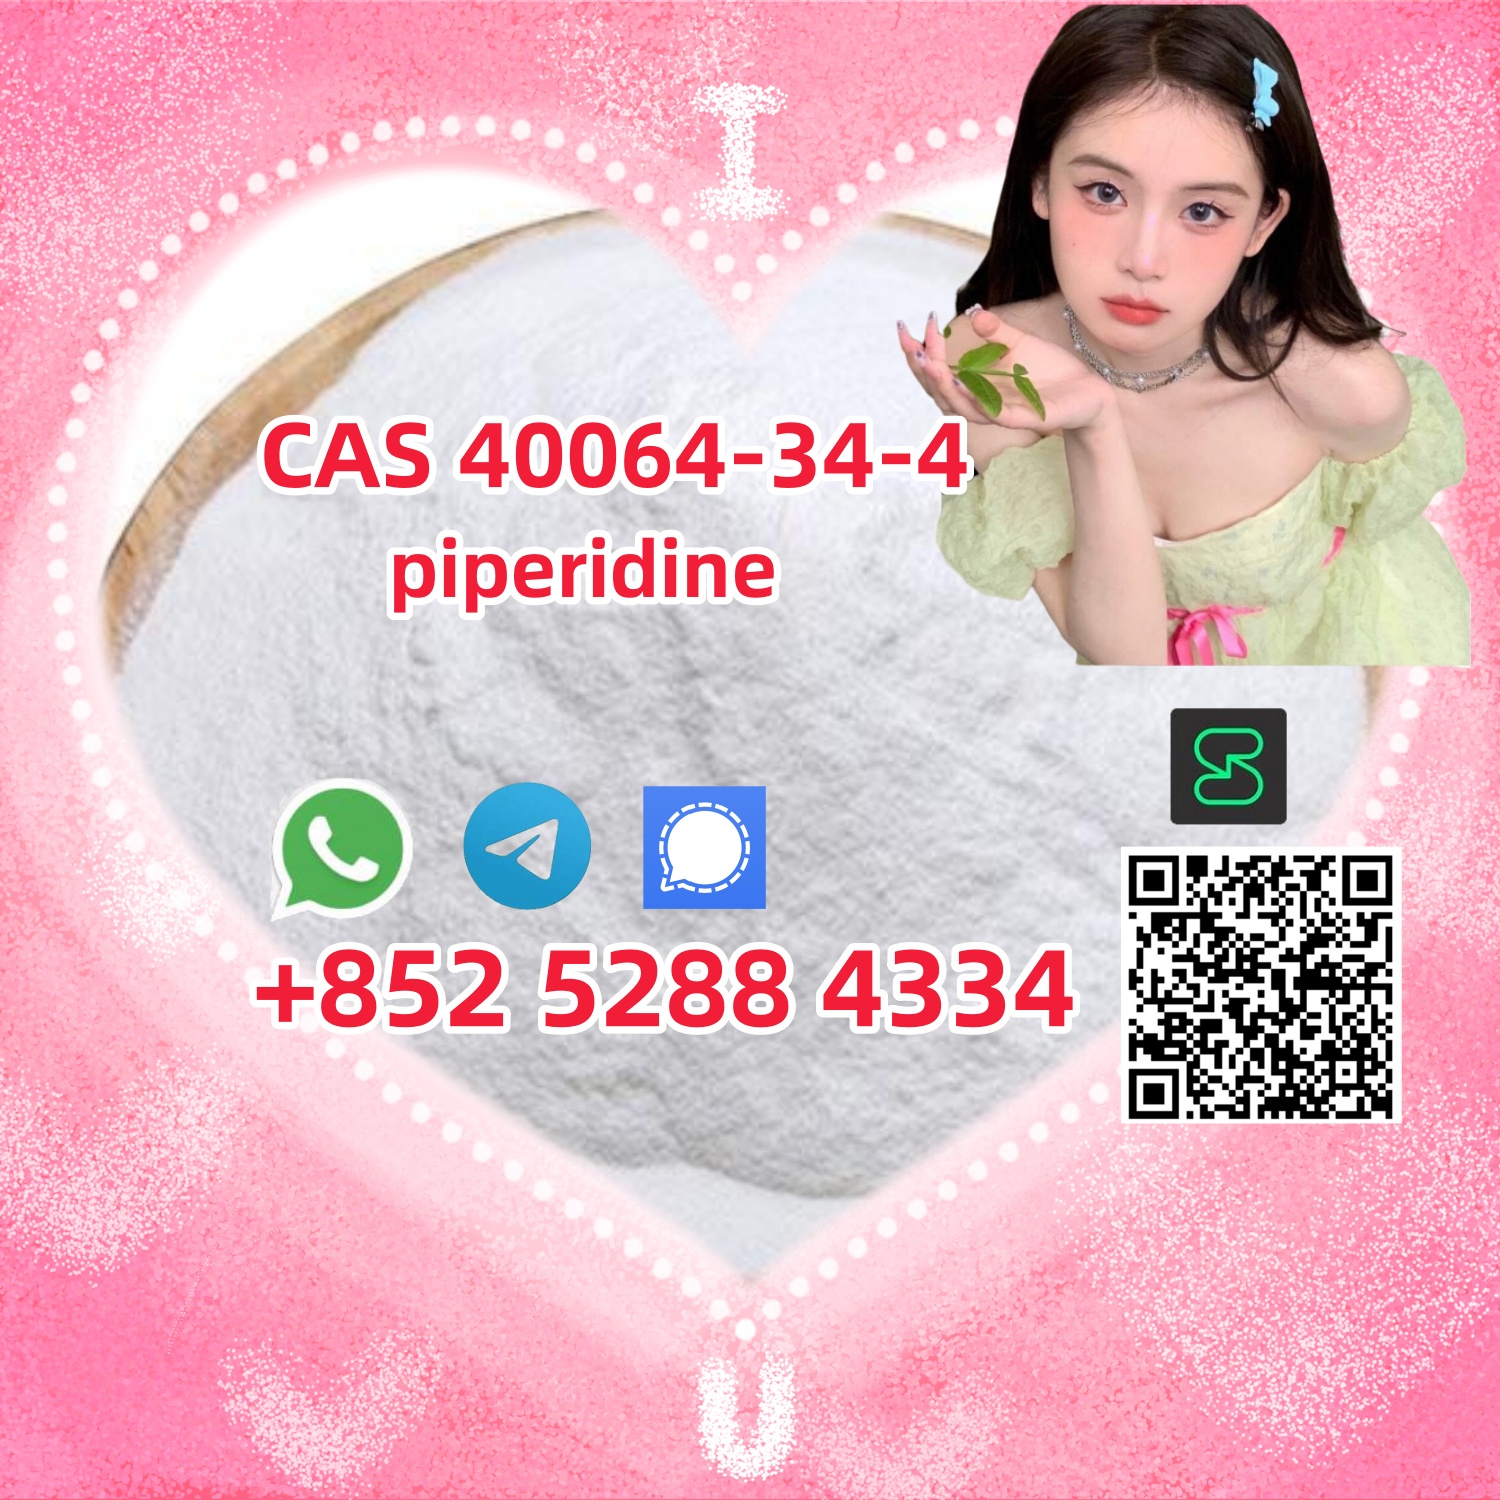 Manufacturer Supply High Quality CAS 40064-34-4 piperidine on Sale,aaaaa,Others,Free Classifieds,Post Free Ads,77traders.com